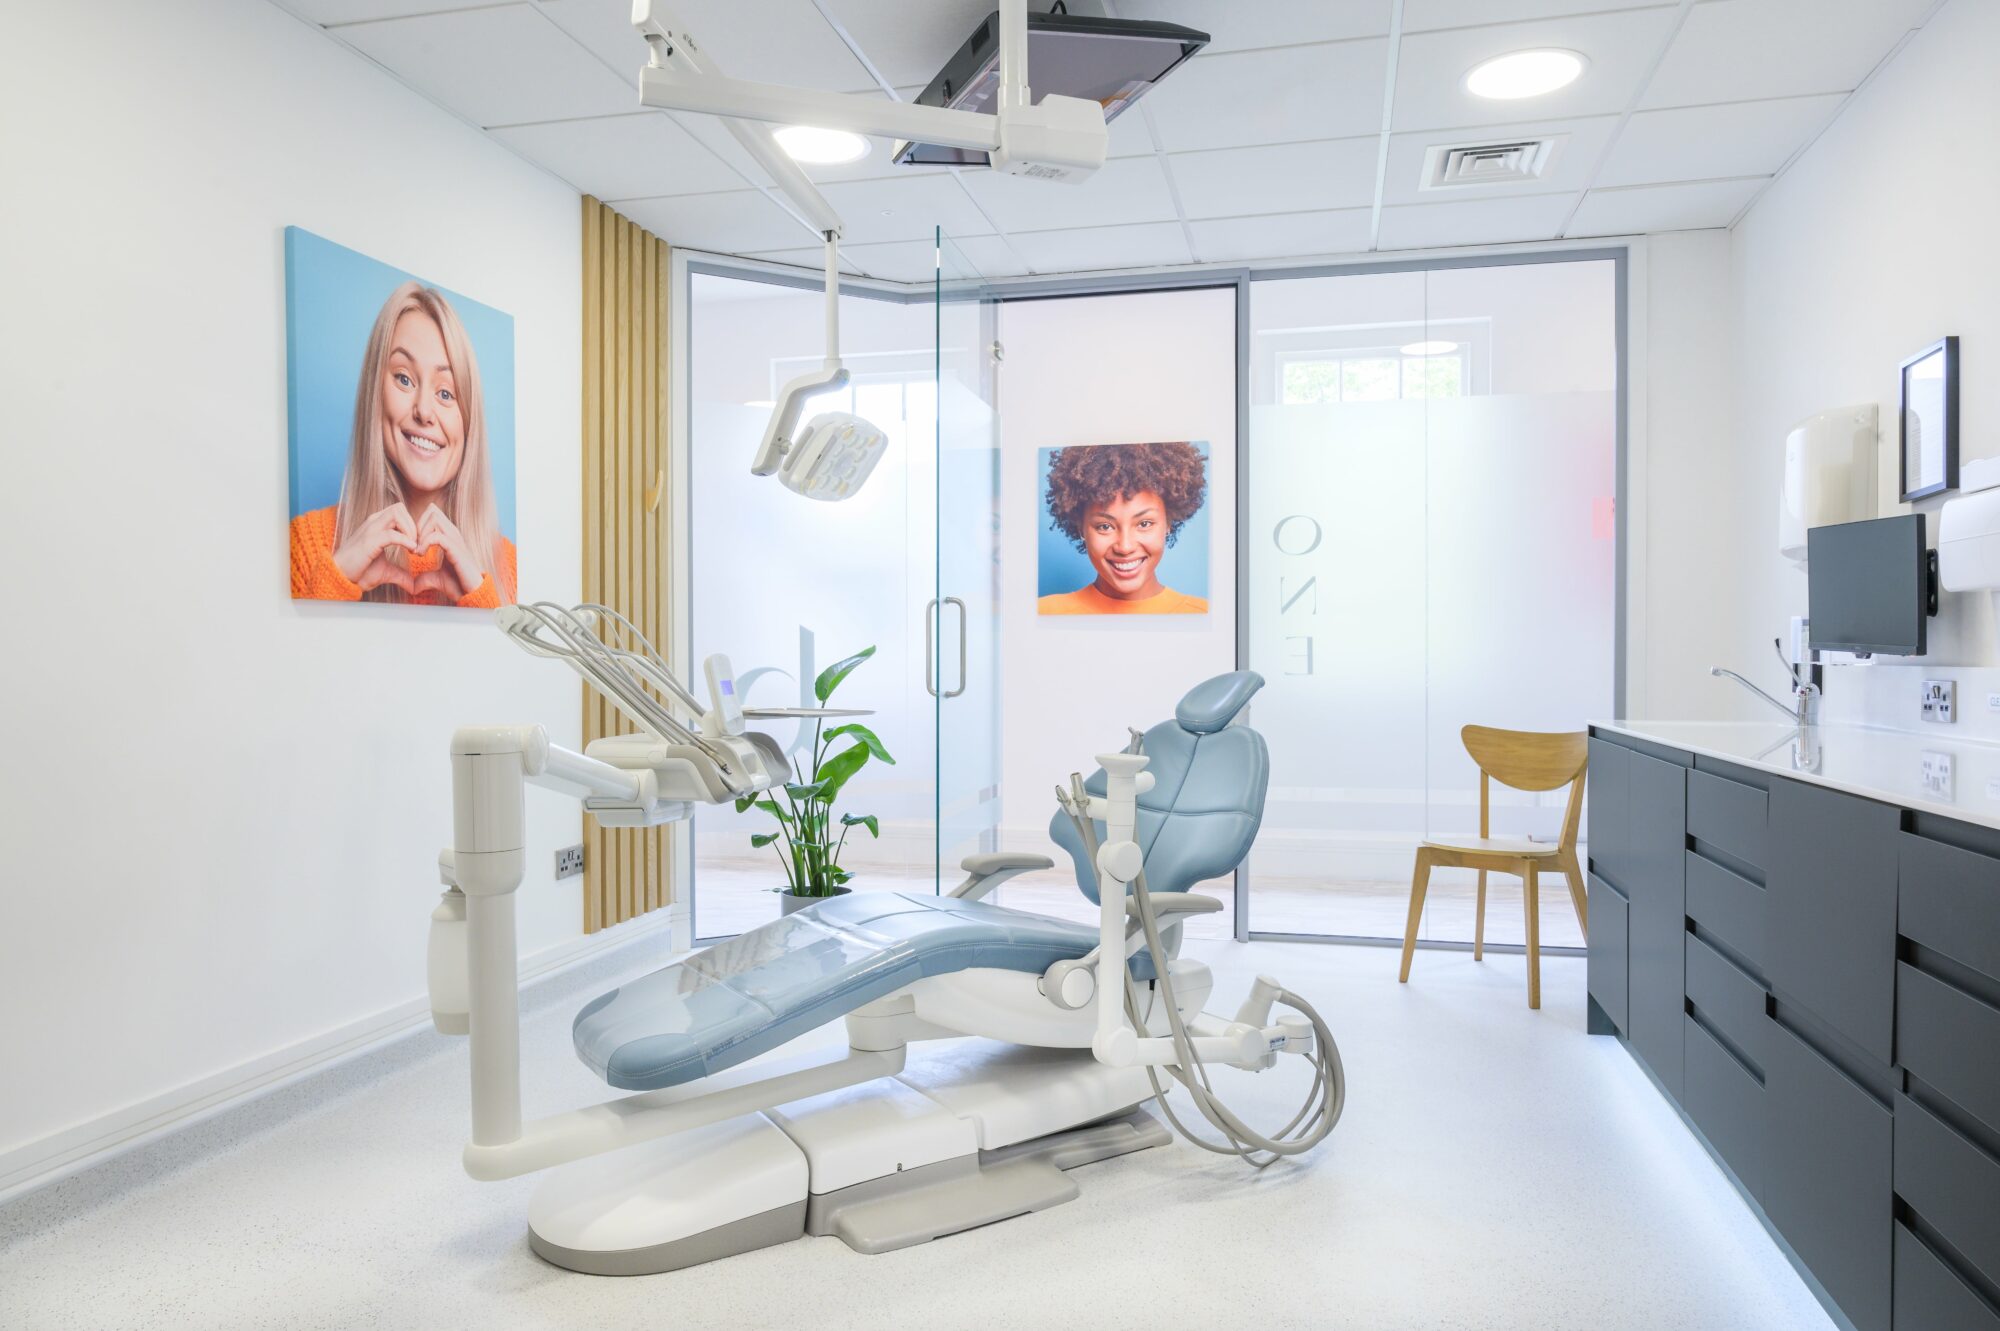 Beyond Dental – 50% off new patient registration, 20% off all treatment